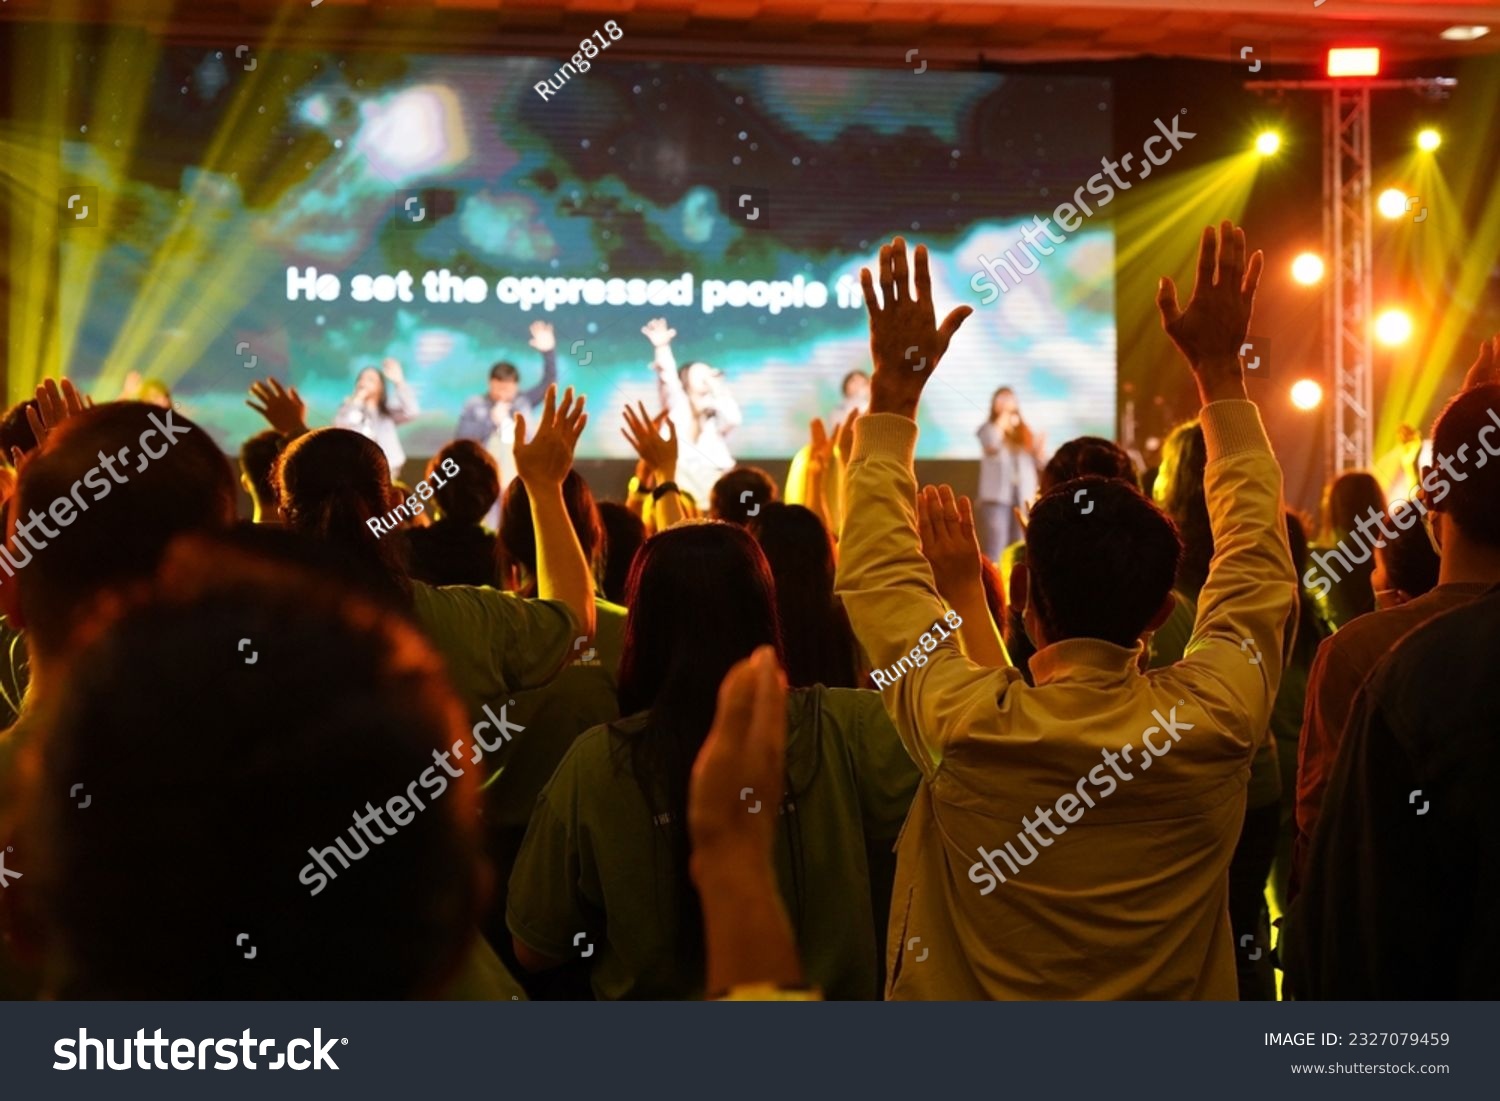 Worship includes music and numerous people lifting their hands in praise to God on stage  #2327079459